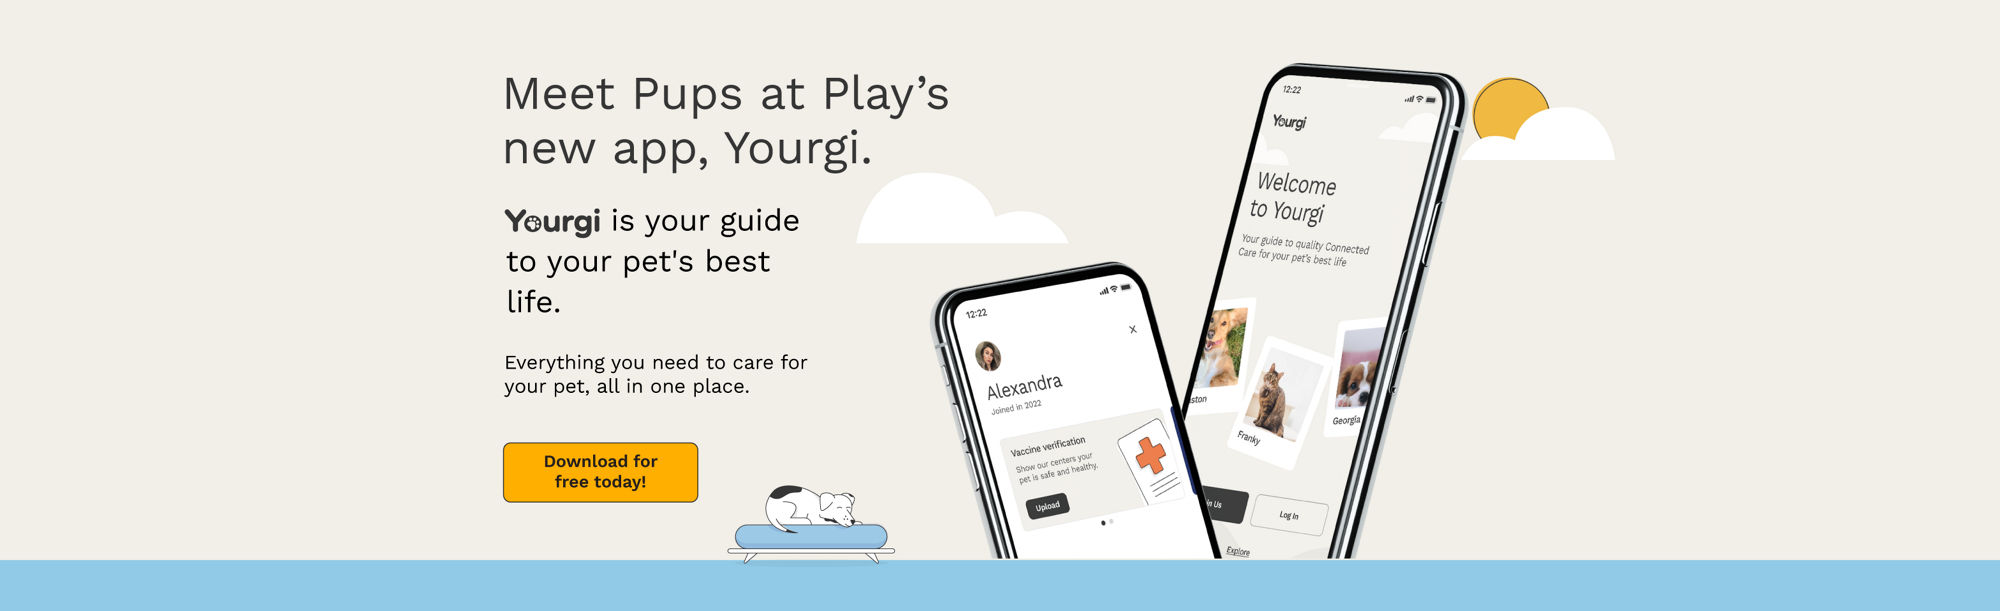 Meet Pup at Play's new app, Yourgi.